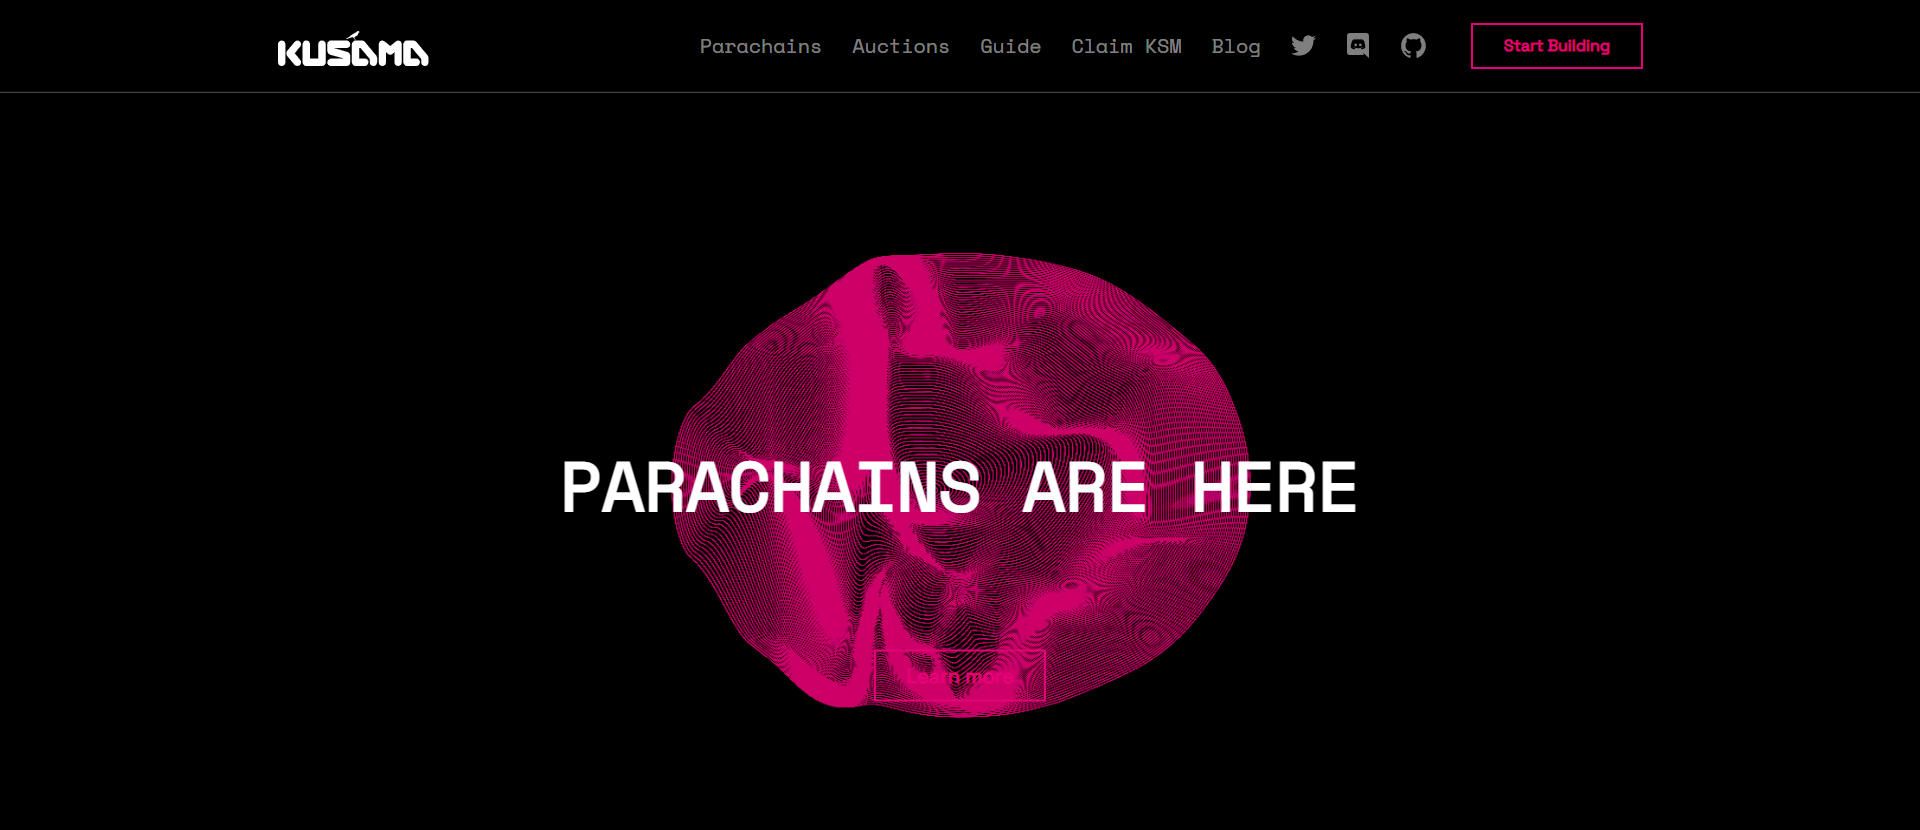 Kusama (KSM) shares the results of its first five parachain auctions